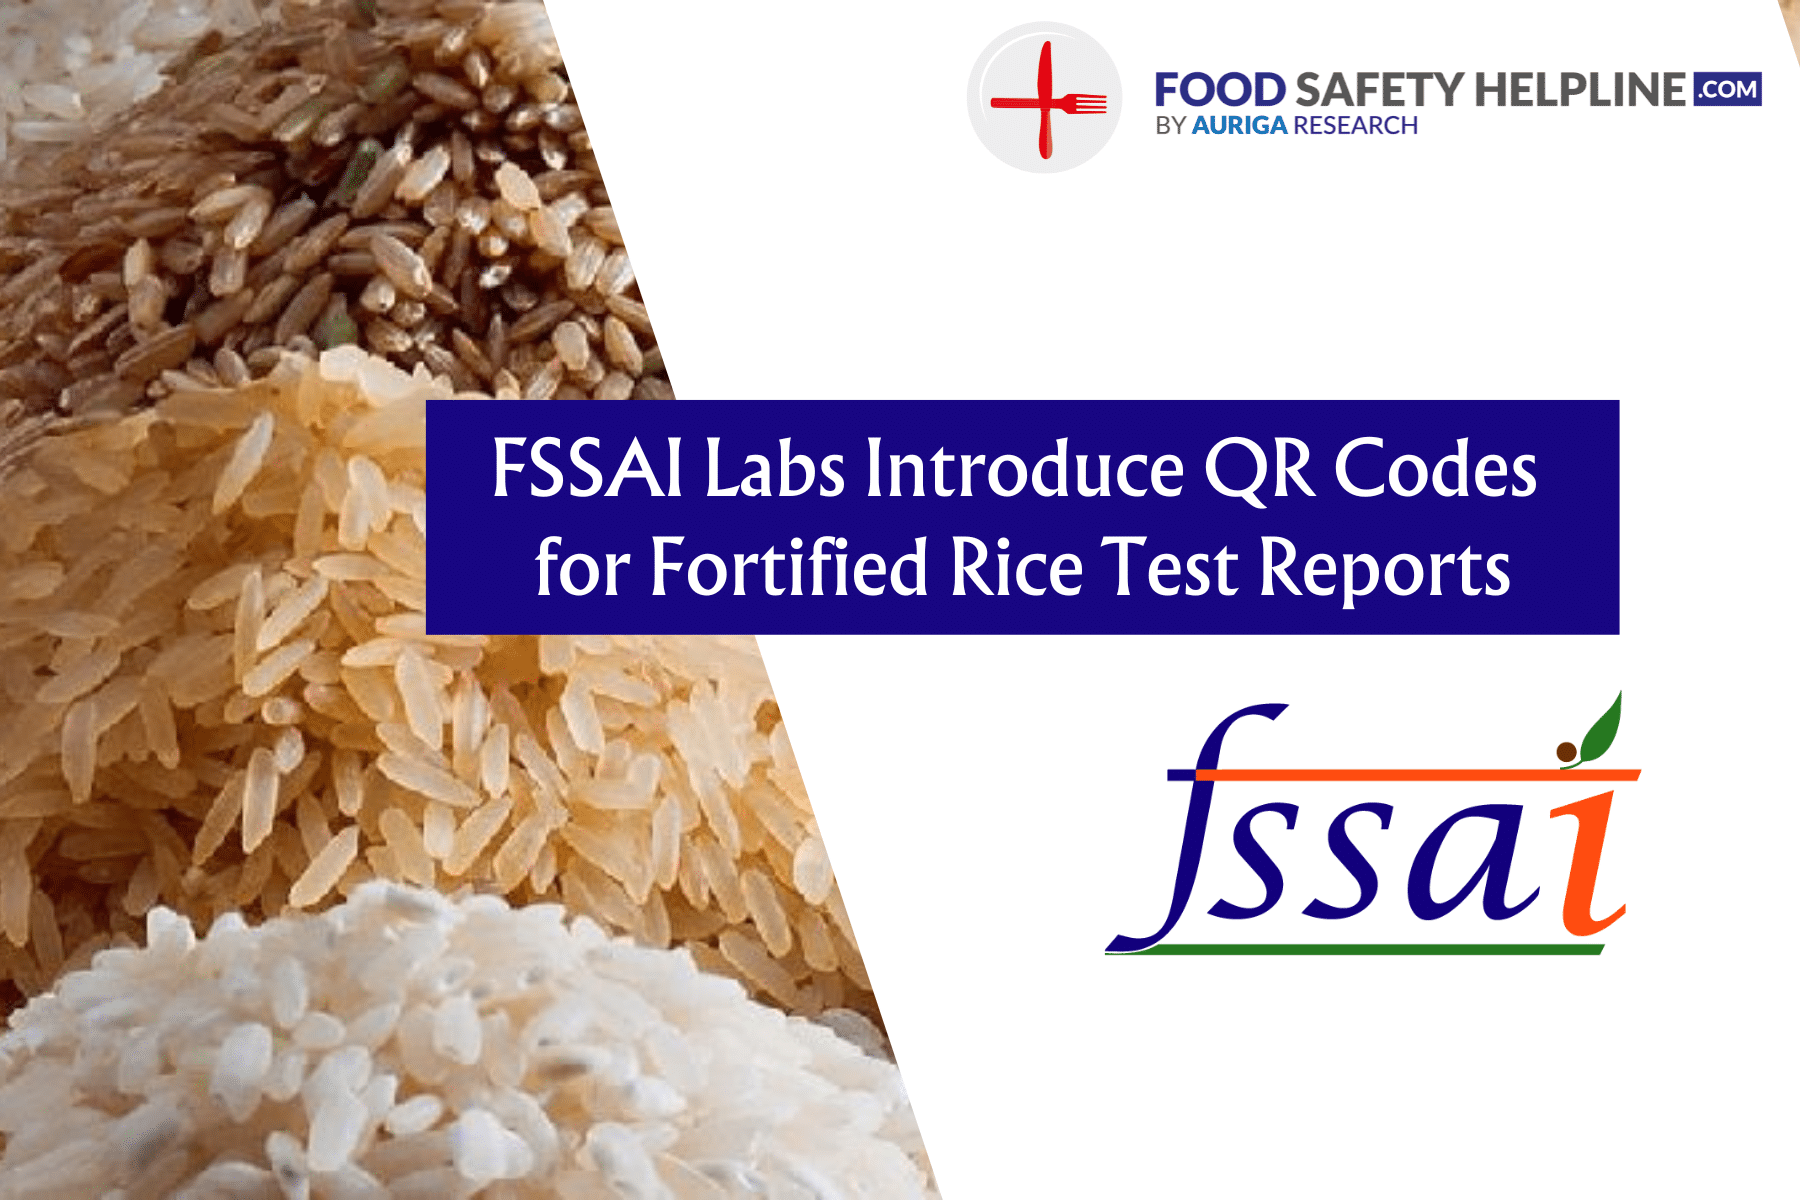 FSSAI Labs Introduce QR Codes for Fortified Rice Test Reports